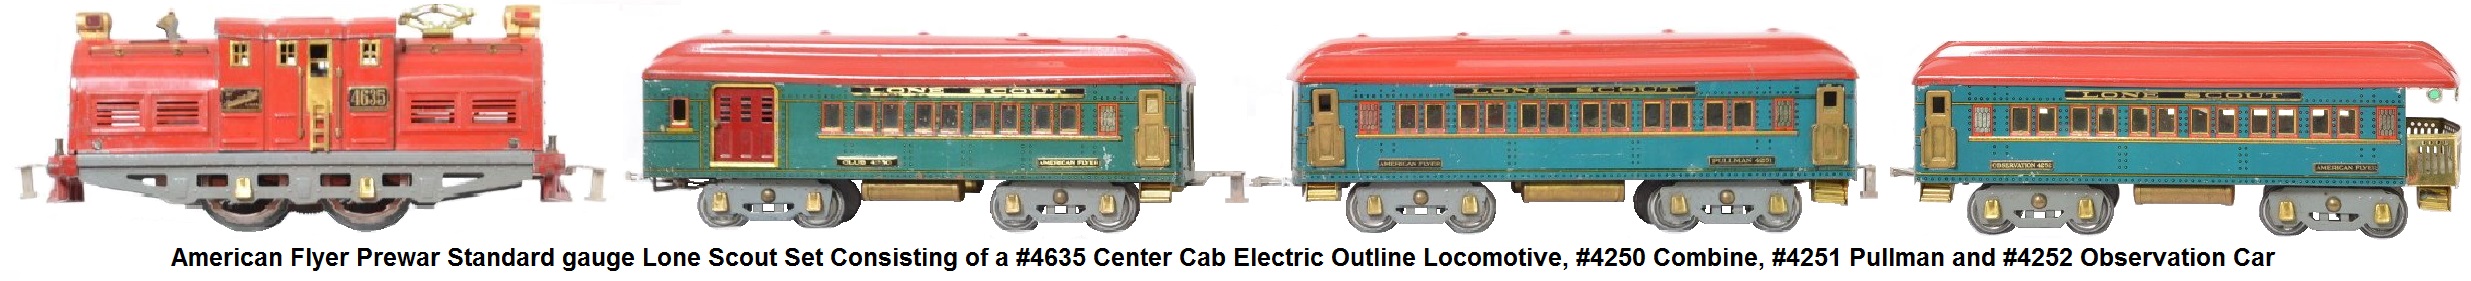 American Flyer Wide gauge Lone Scout set consisting of a #4635 center cab electric locomotive, #4250 Club car, #4251 Pullman and #4252 observation cars